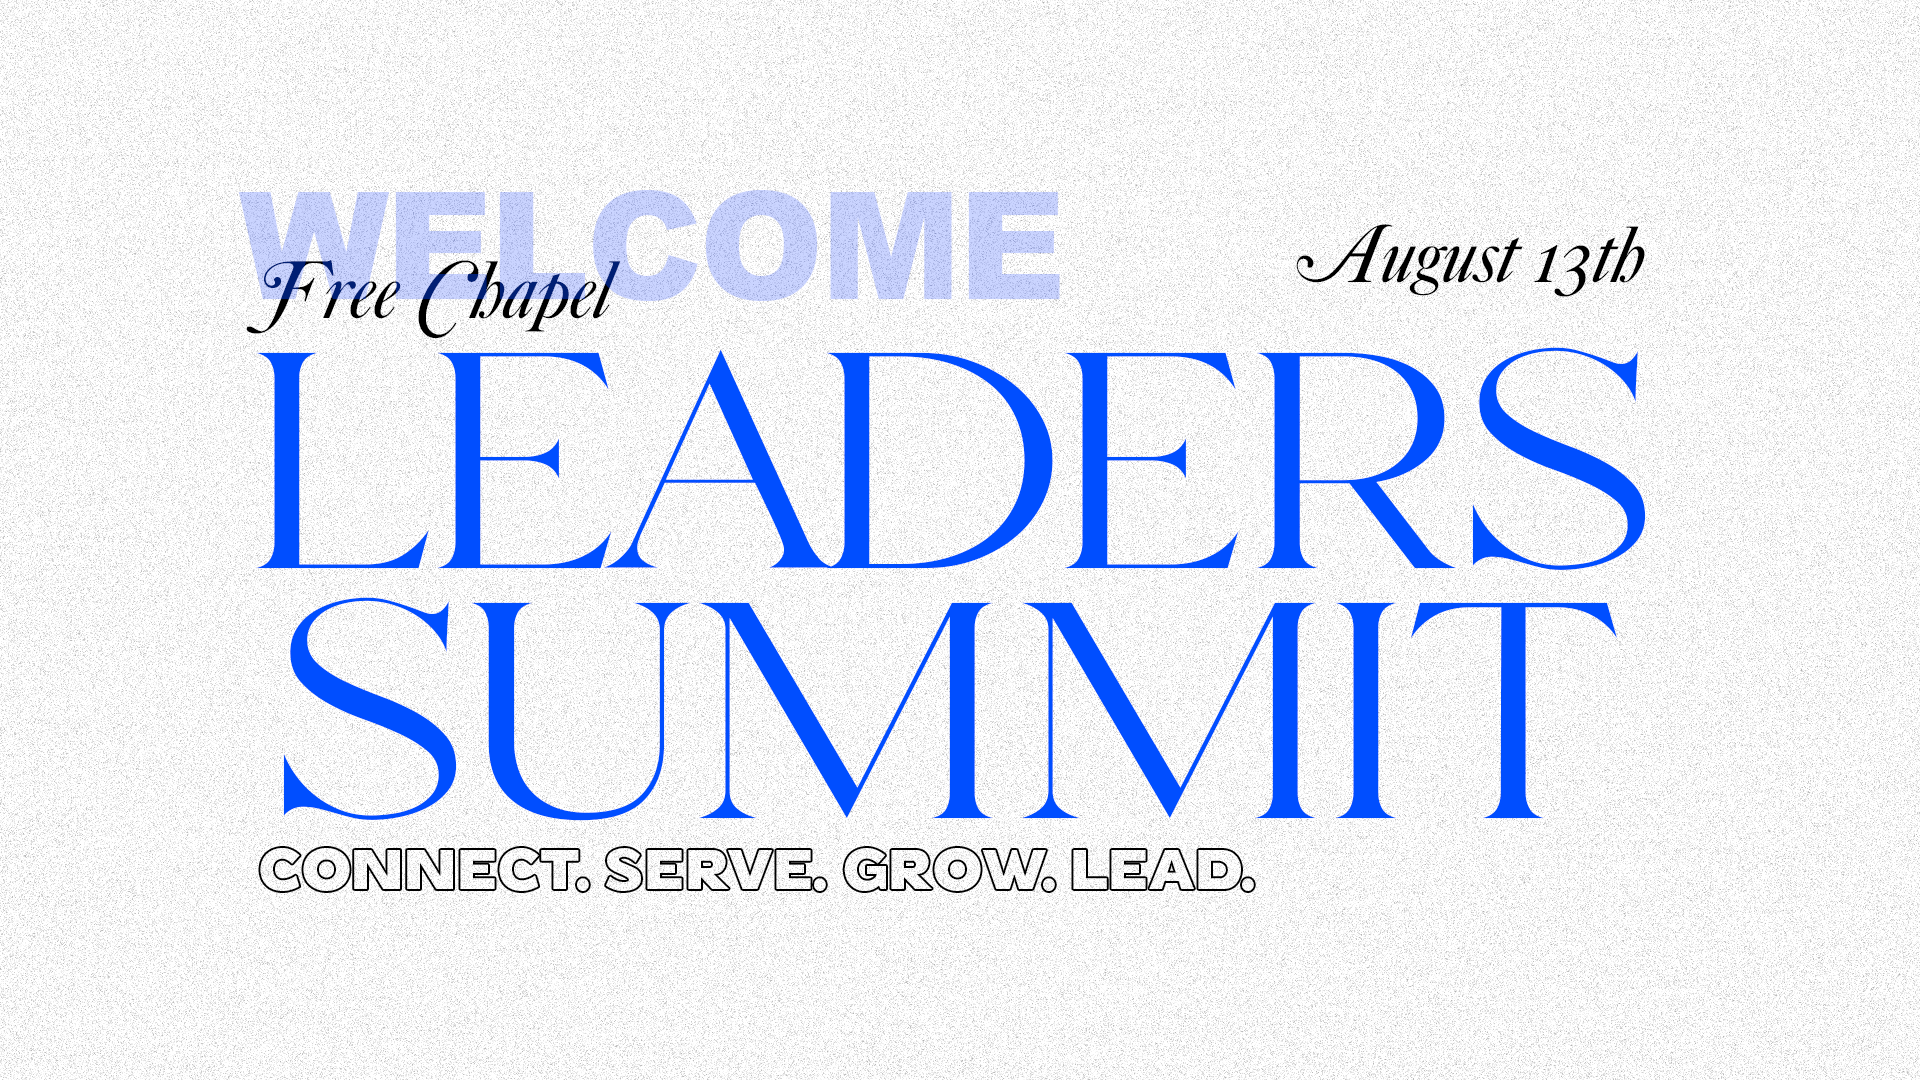 Leaders Summit at the Gainesville campus